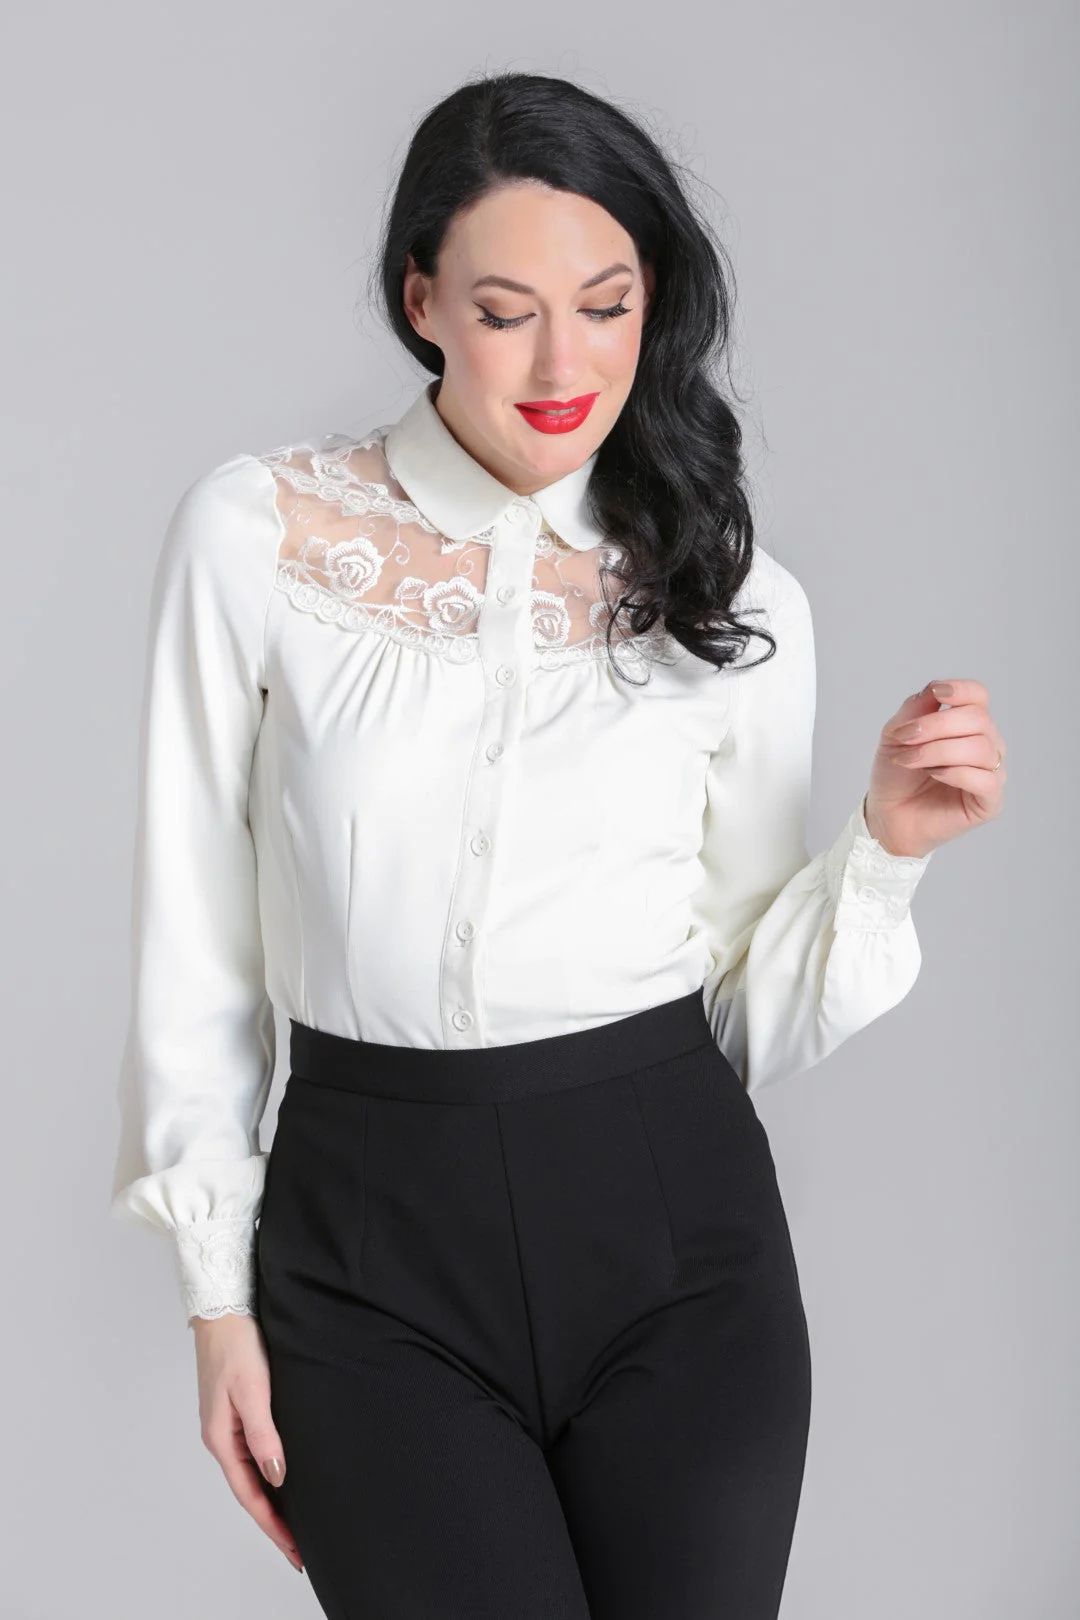 PS60273bbbbbb-chemisier-blouse-pin-up-rockabilly-50-s-retro-hell-bunny-lucille